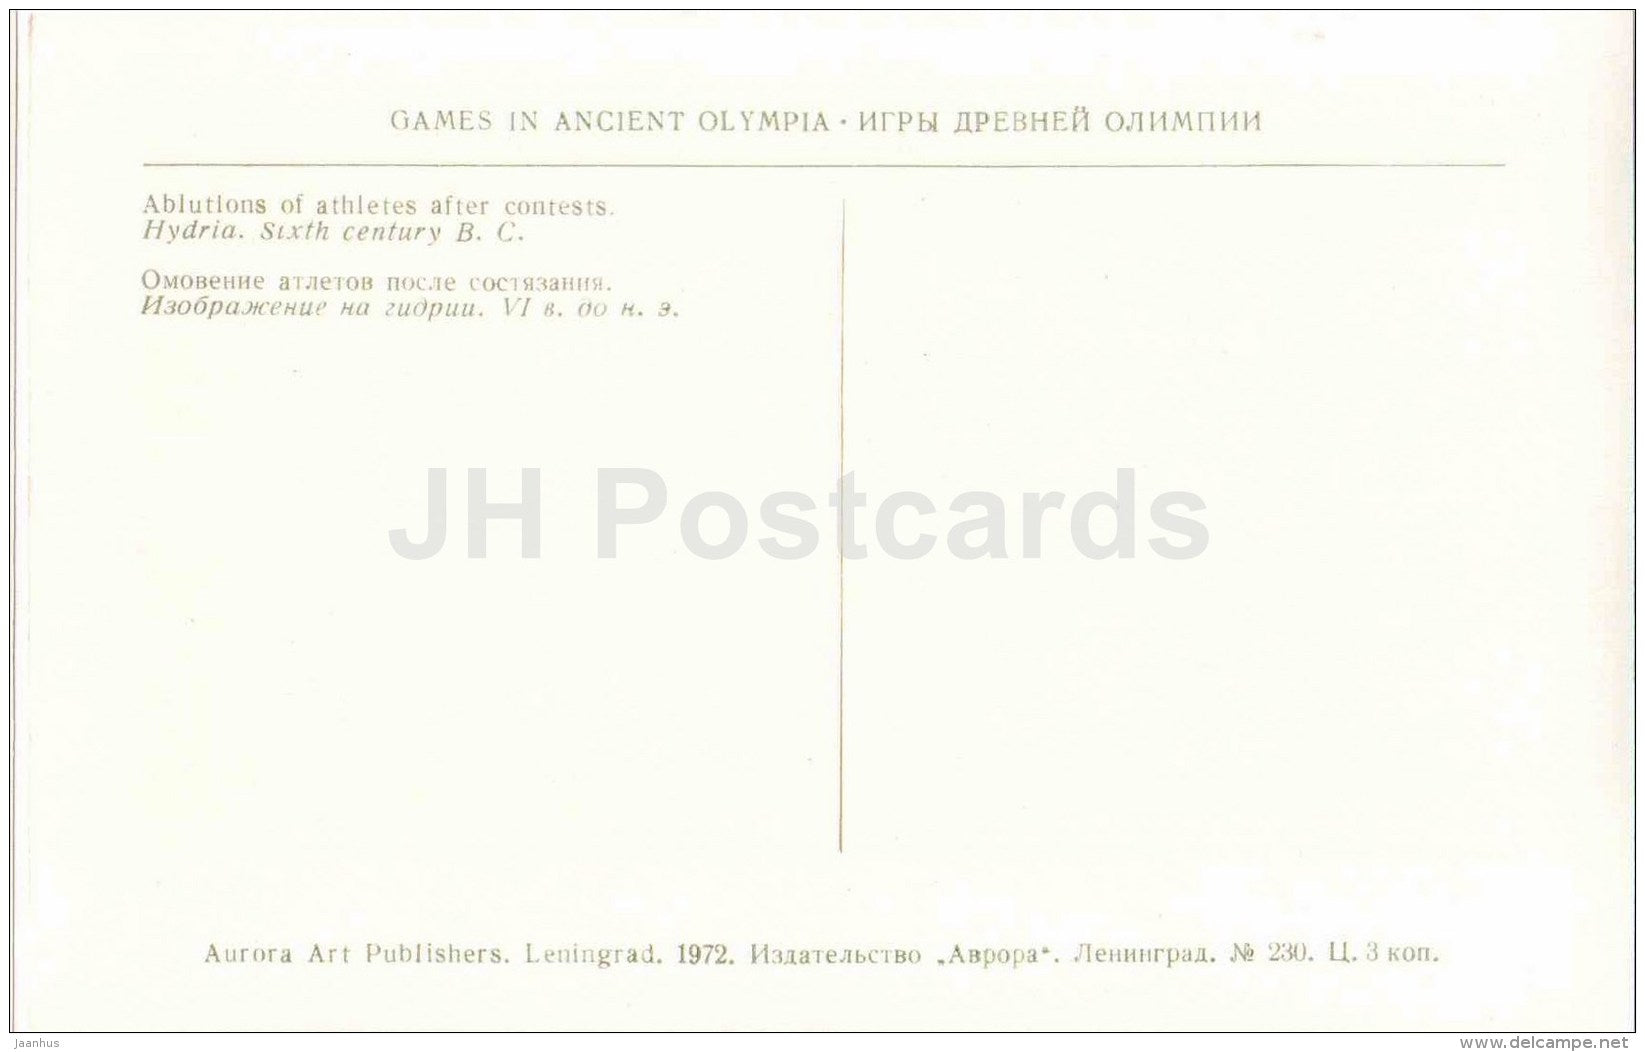 Ablutions of the Athletes after Contests . Hydria - Games in Ancient Olympia - Greece - 1972 - Russia USSR - unused - JH Postcards